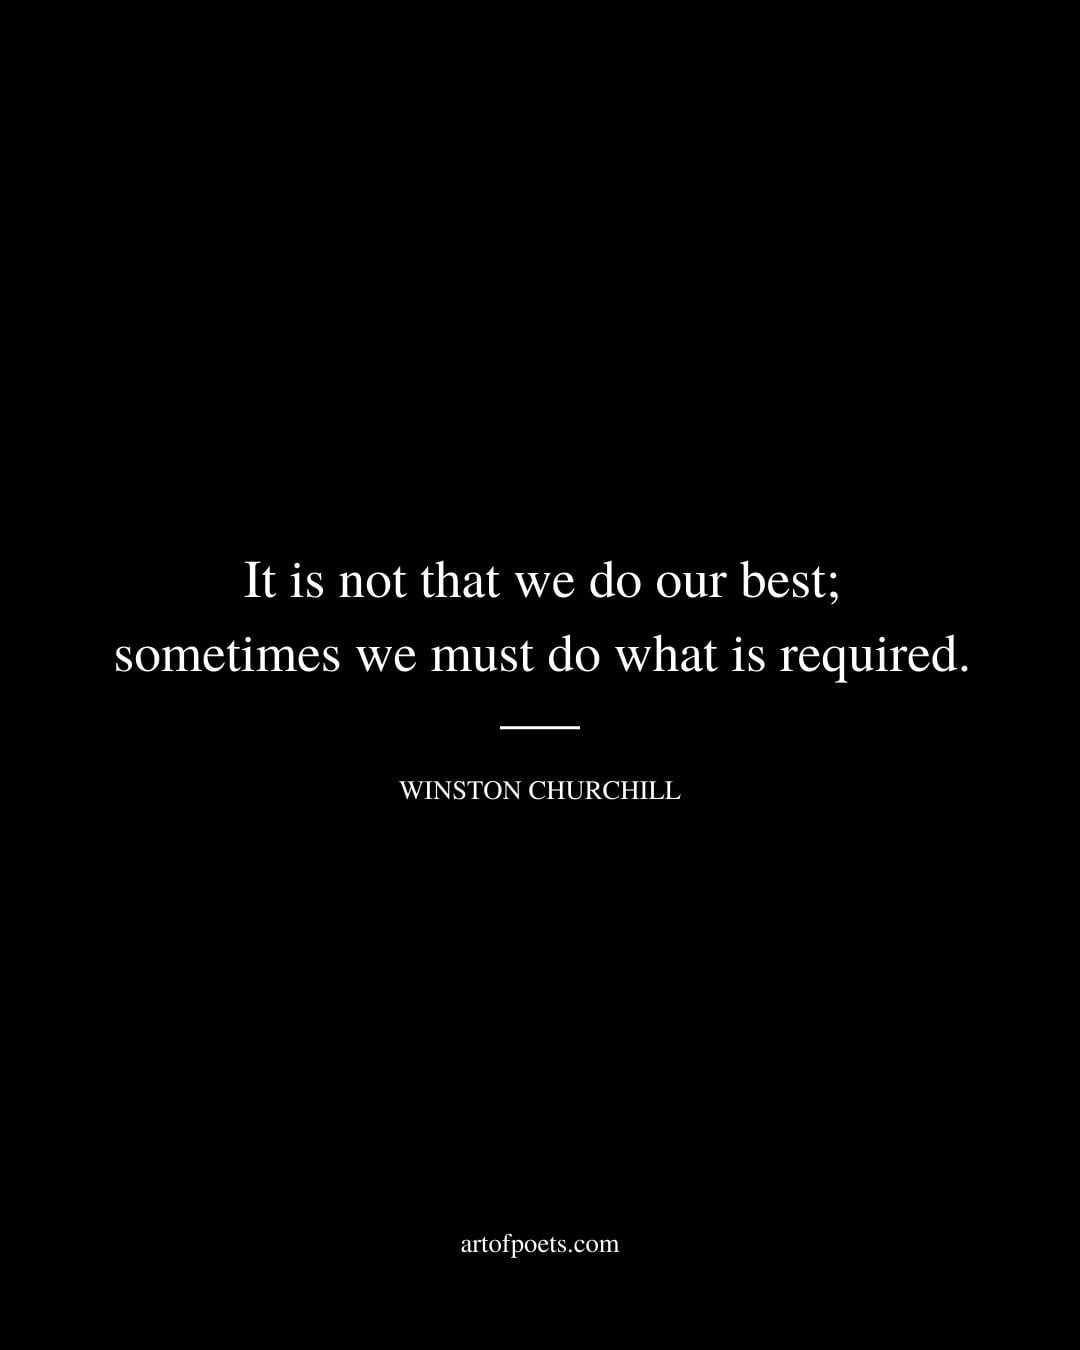 It is not that we do our best sometimes we must do what is required